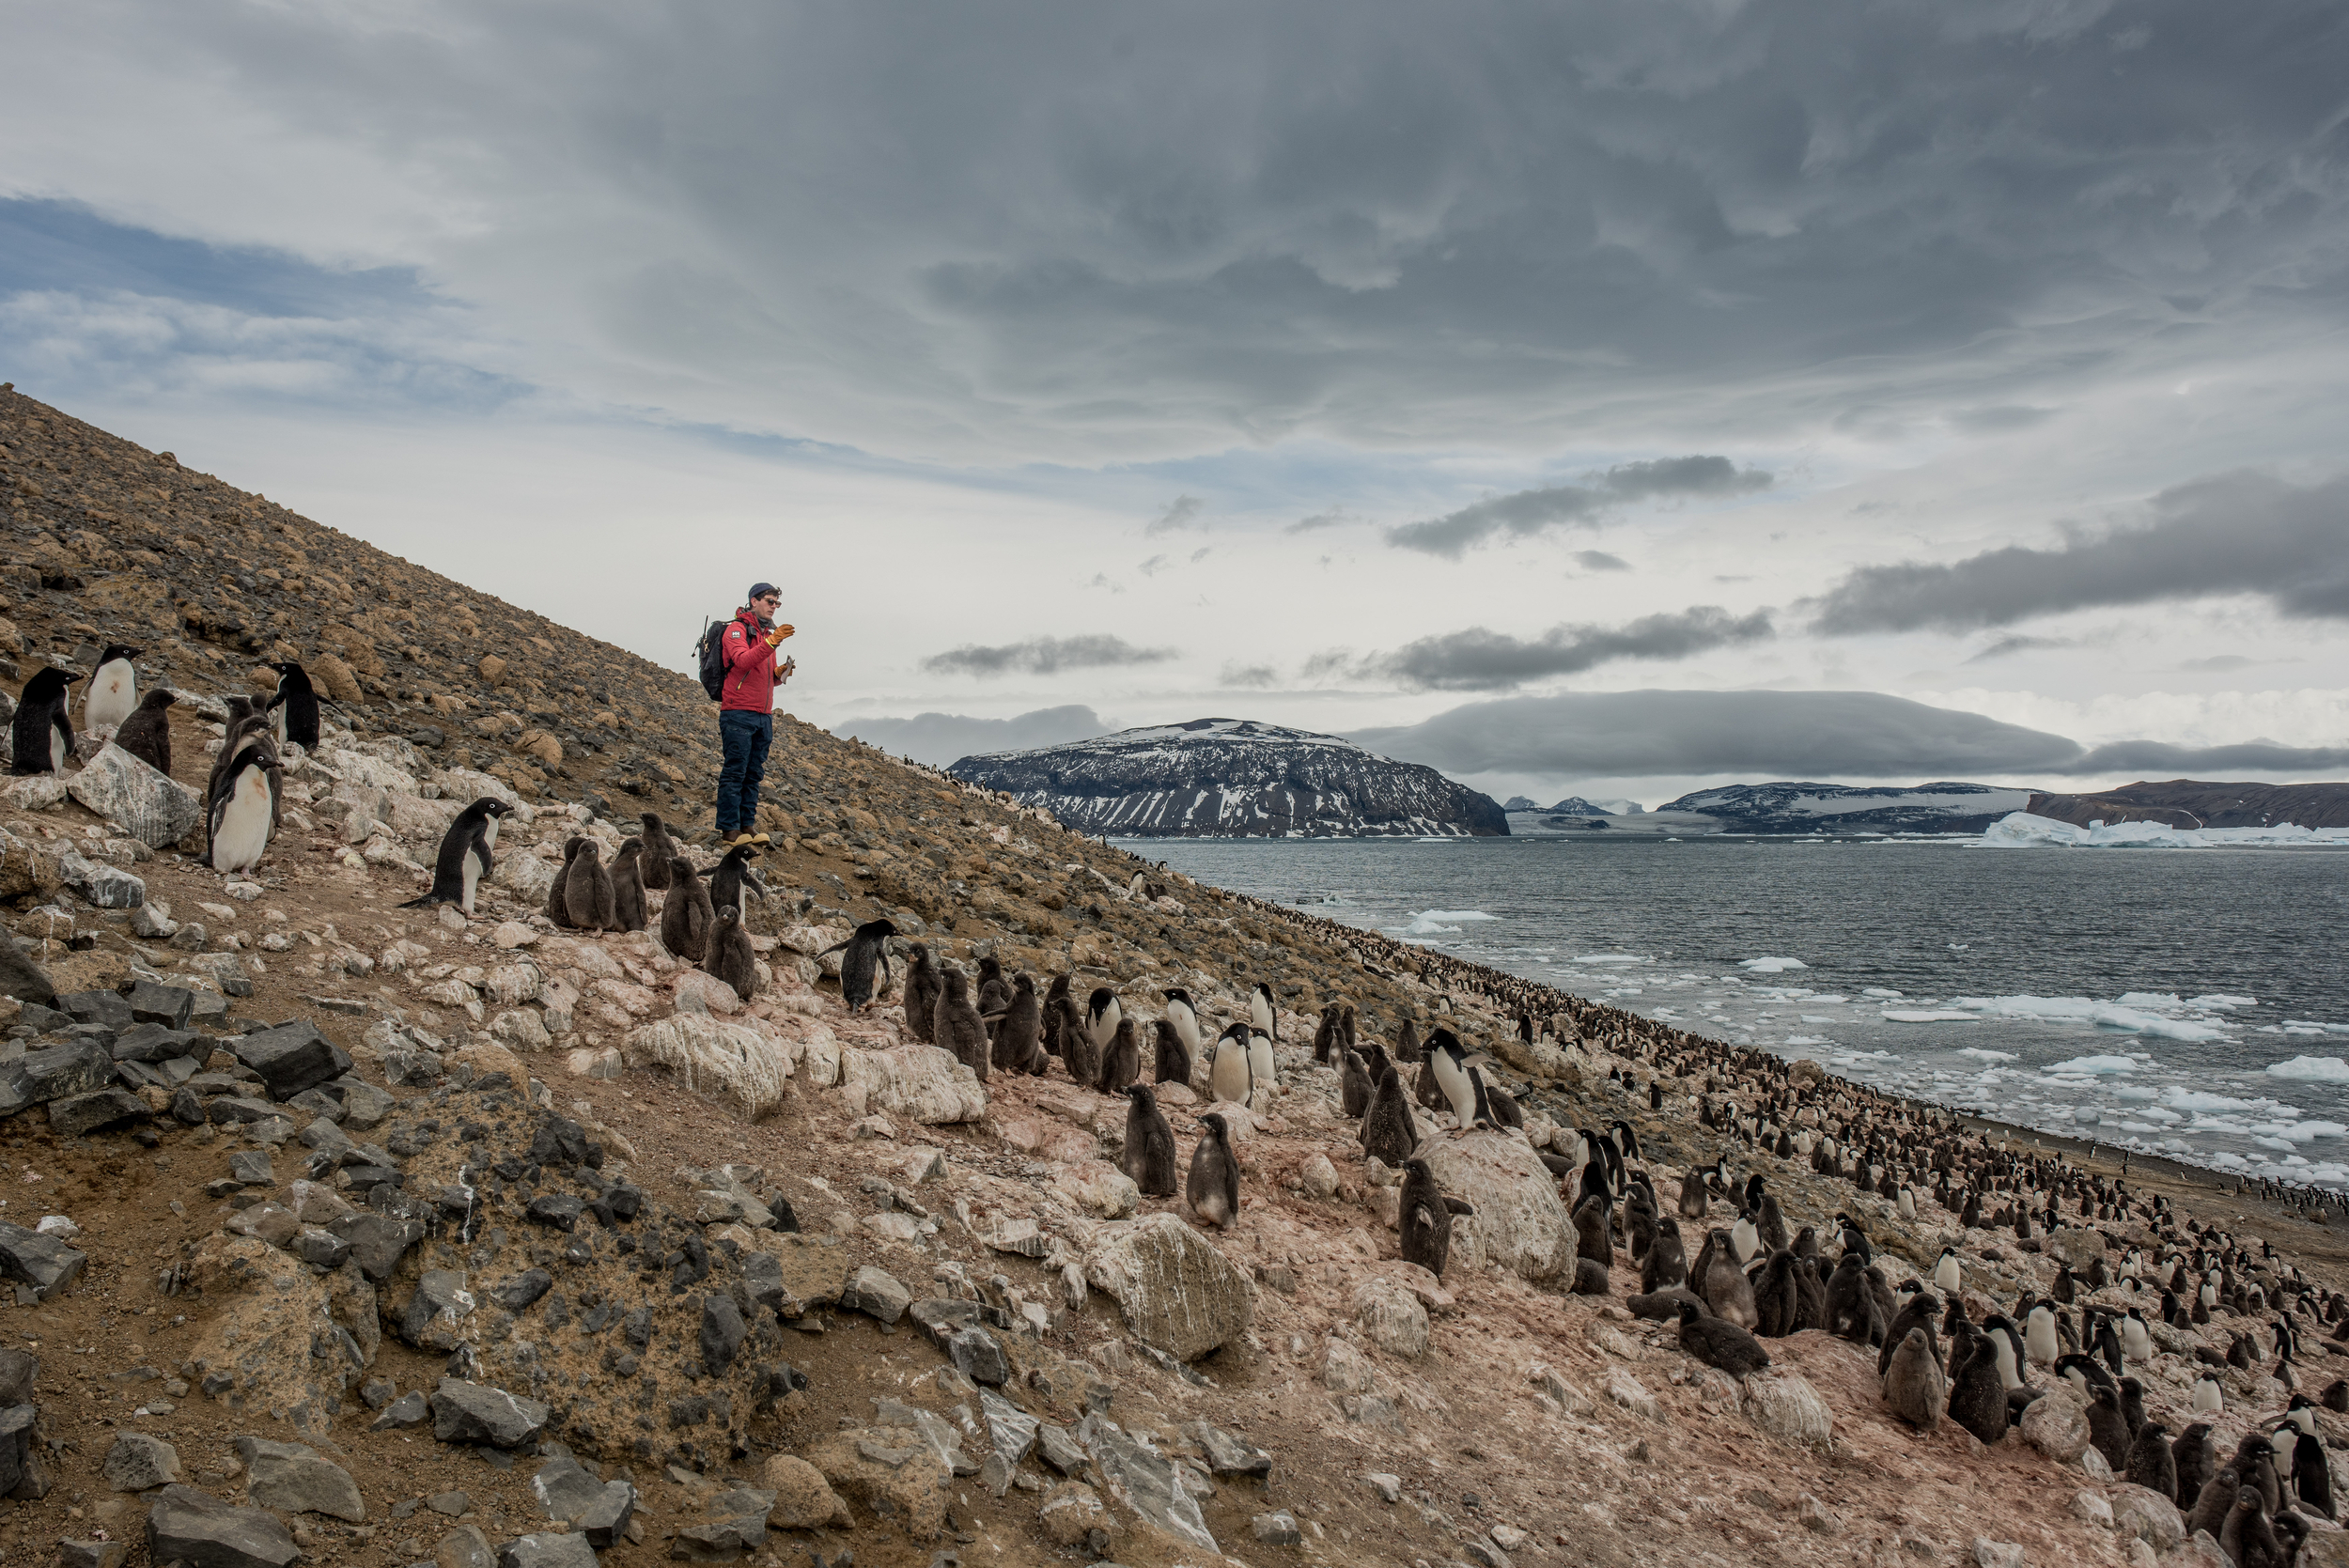 Scientist Dr Alex Borowicz from Stony Brook University counts penguin chicks in an Adelie penguin colony in Vortex Island, Antarctica